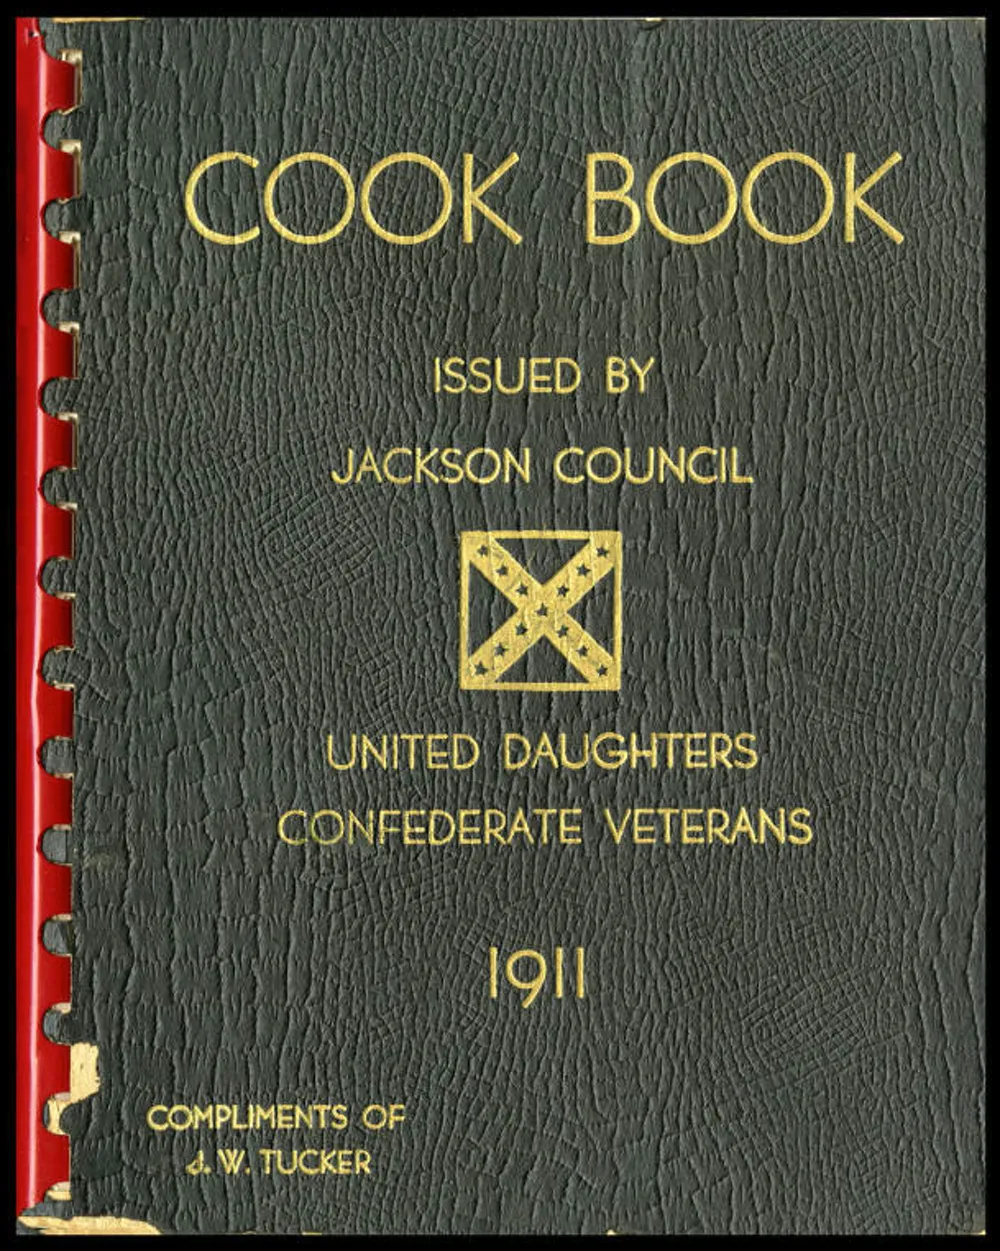 The United Daughters of the Confederacy cookbook features a take on the Scotch woodcock.